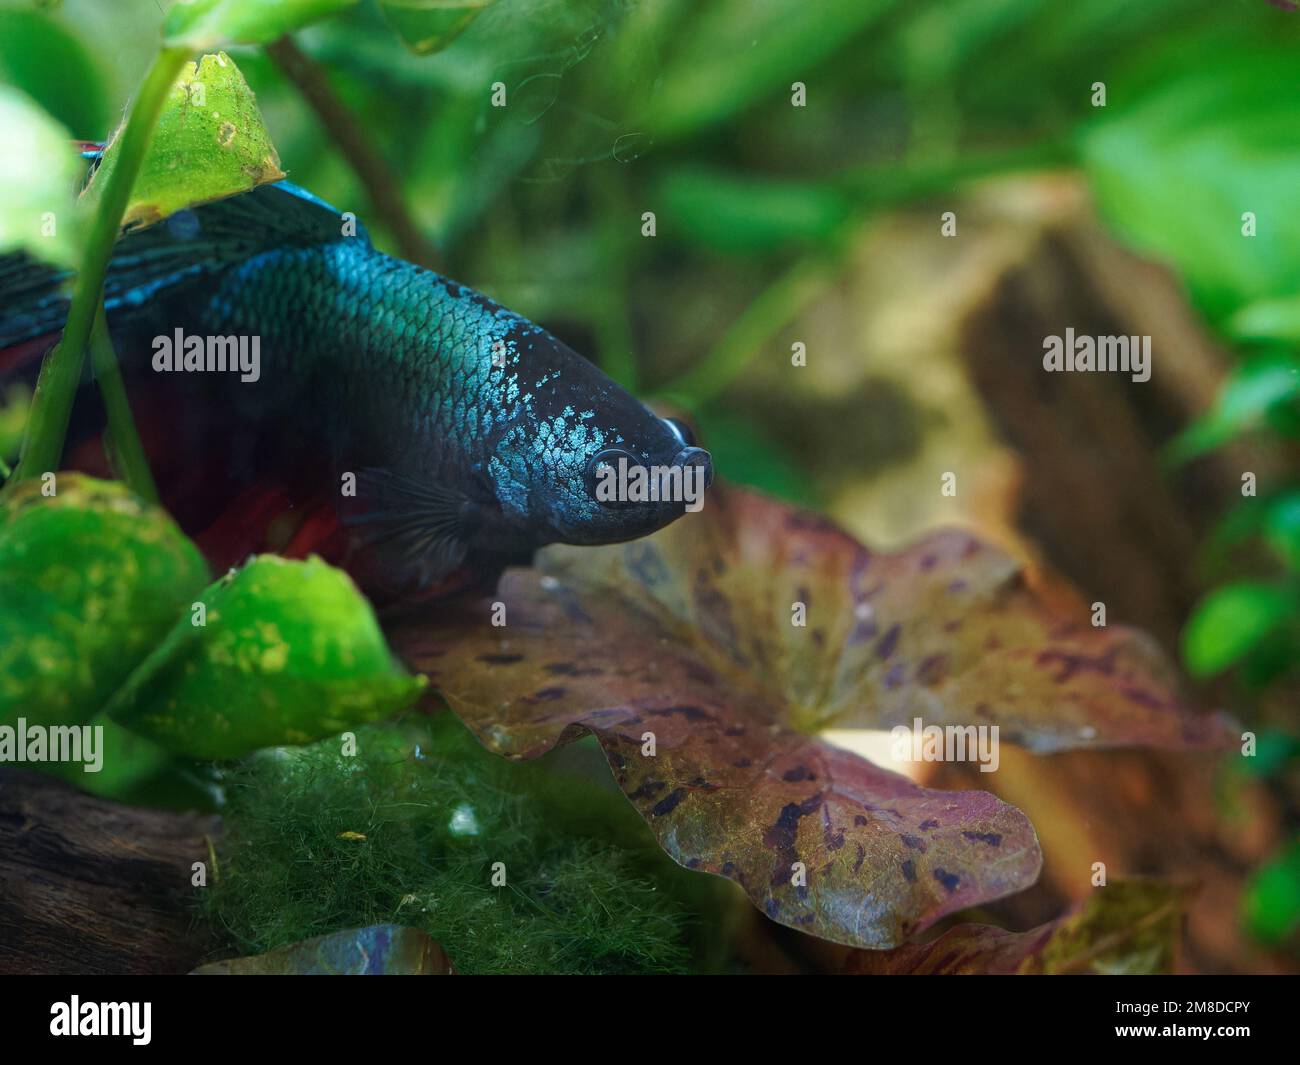 Blue and red male betta (Betta splendens) resting on leaves in planted tank with anubias, tiger lotus, marimo, and rocks Stock Photo